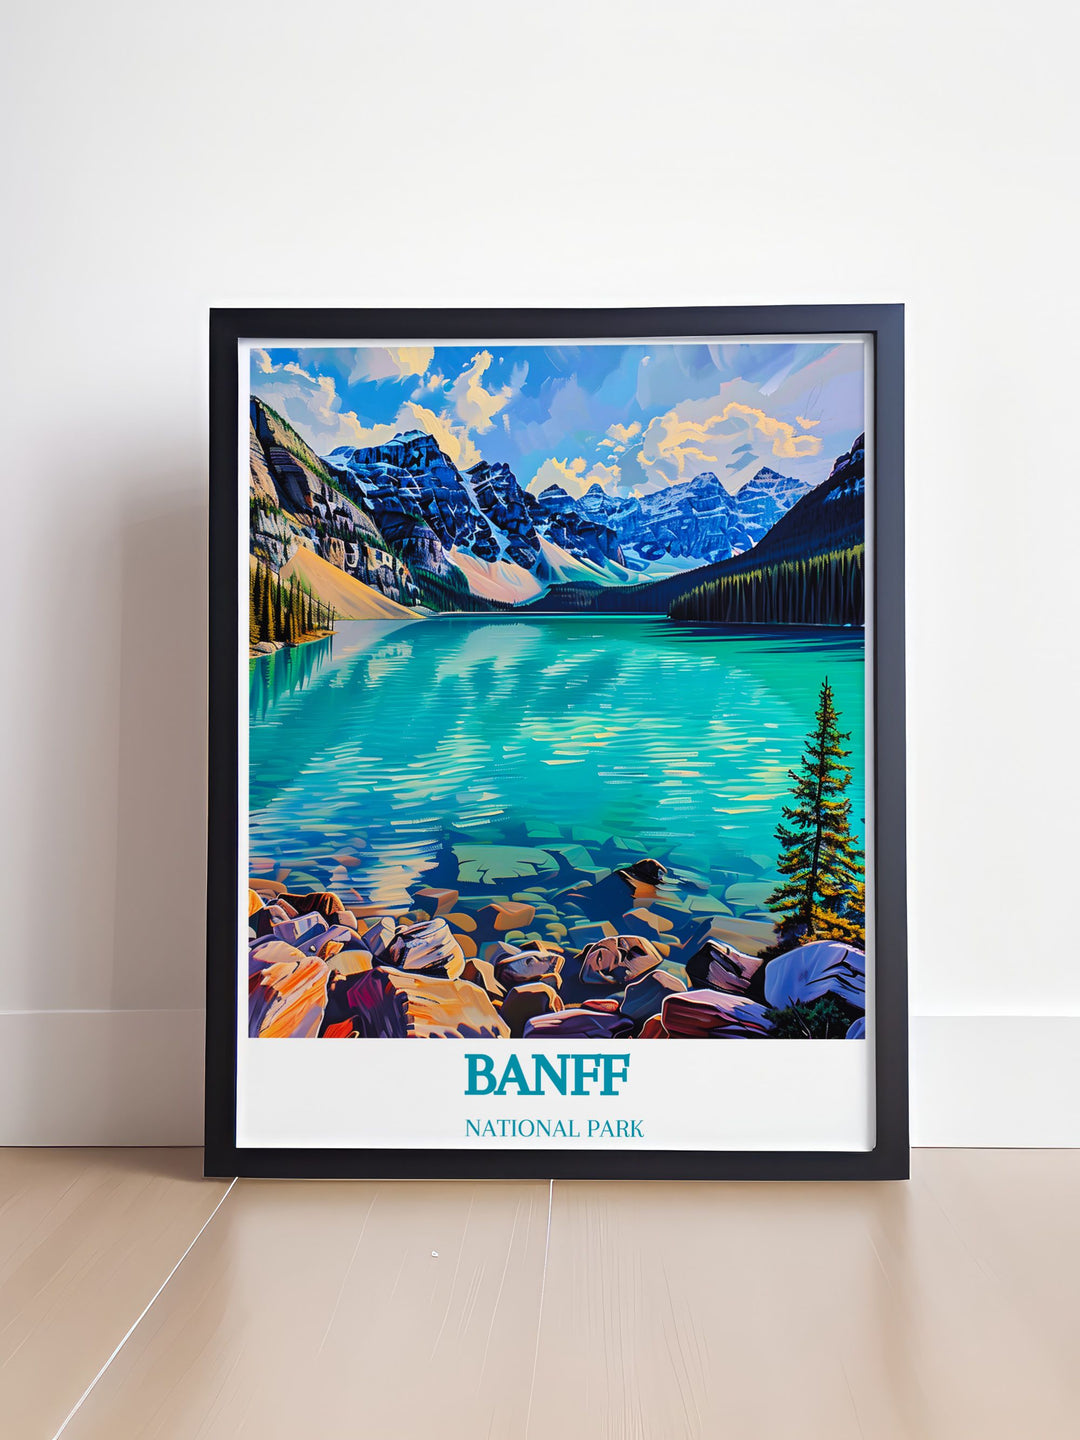 Lake Louise canvas art capturing the peaceful blue waters and snowy mountain peaks, ideal for those seeking a serene addition to their home or office decor.